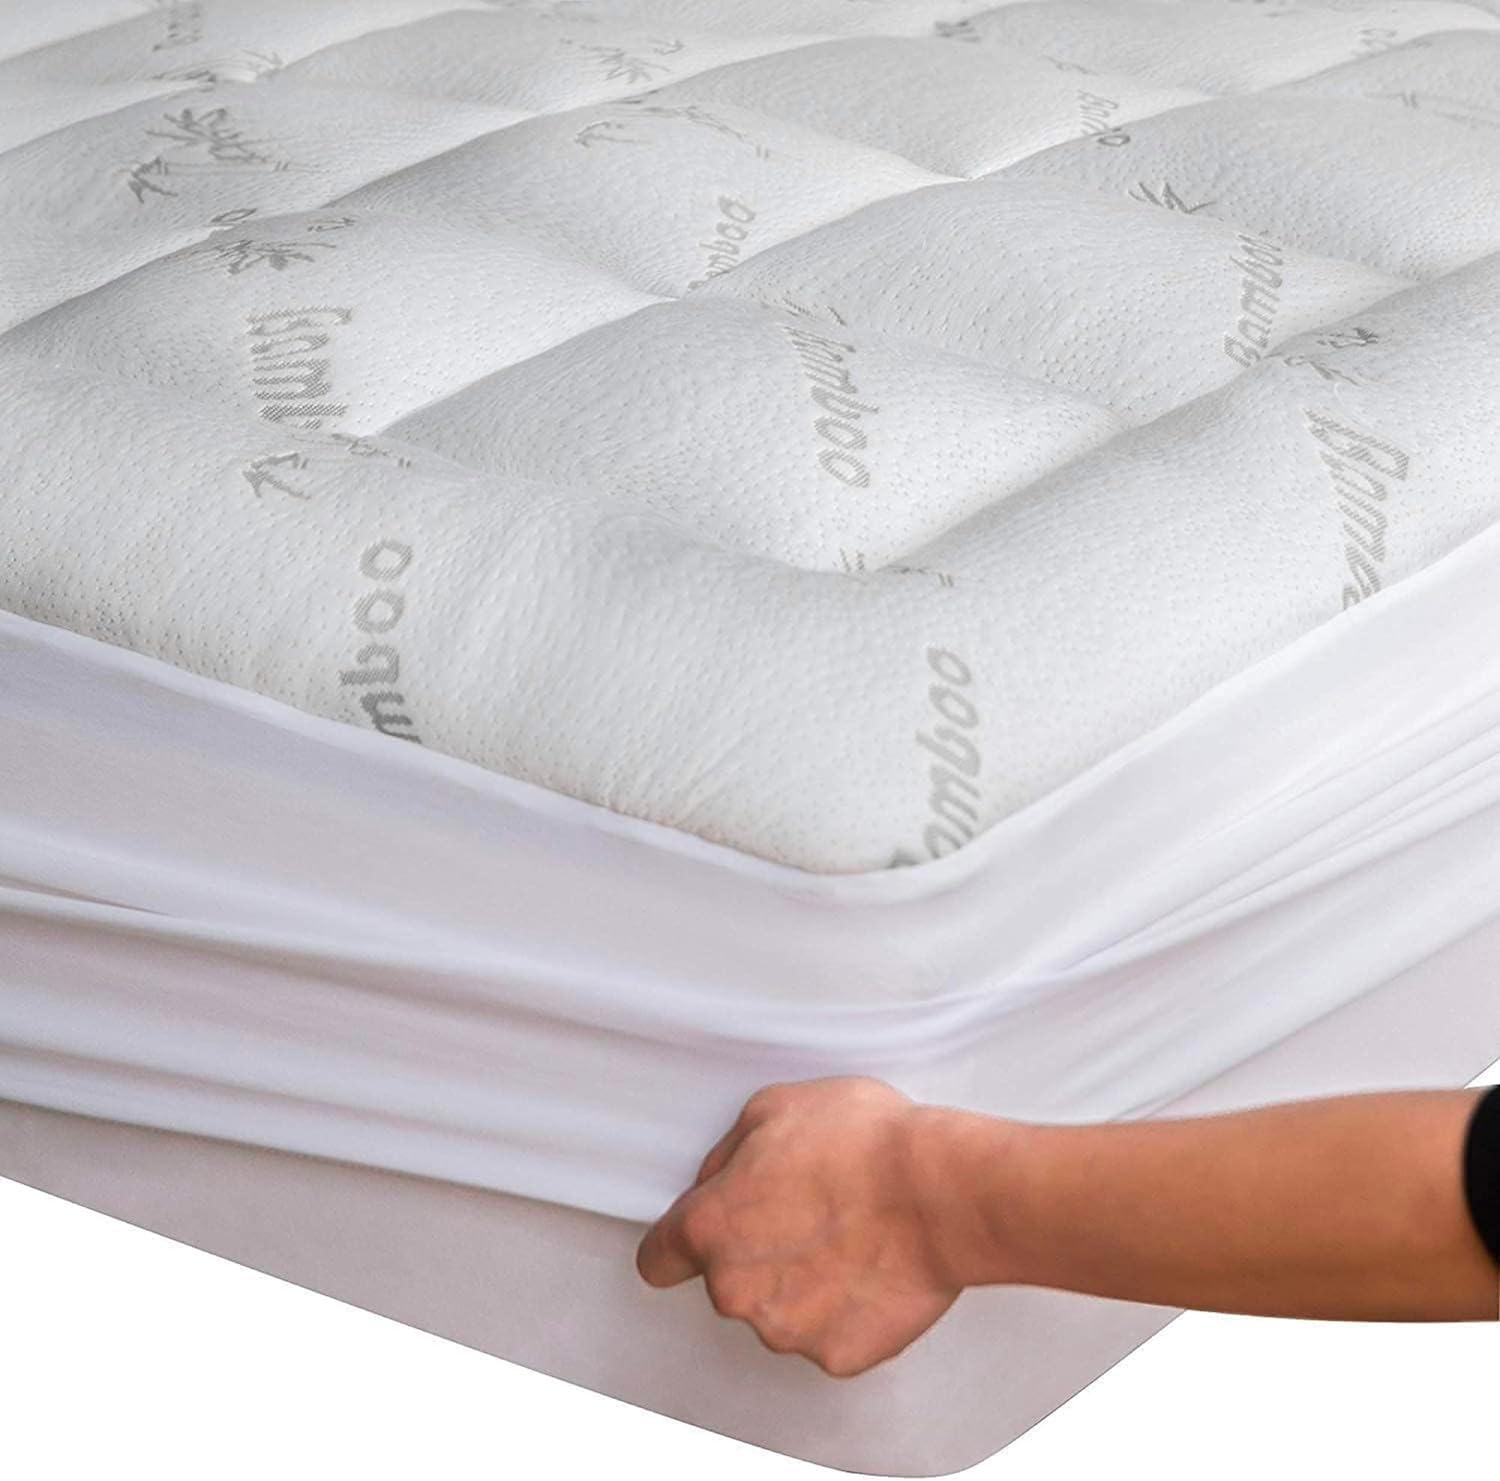 Bamboo Full Mattress Topper - Thick Cooling Breathable Pillow Top Mattress Pad for Back Pain Relief - Deep Pocket Topper Fits 8-20 Inches Mattress (Viscose Made from Bamboo, 54x75 Inches, White)